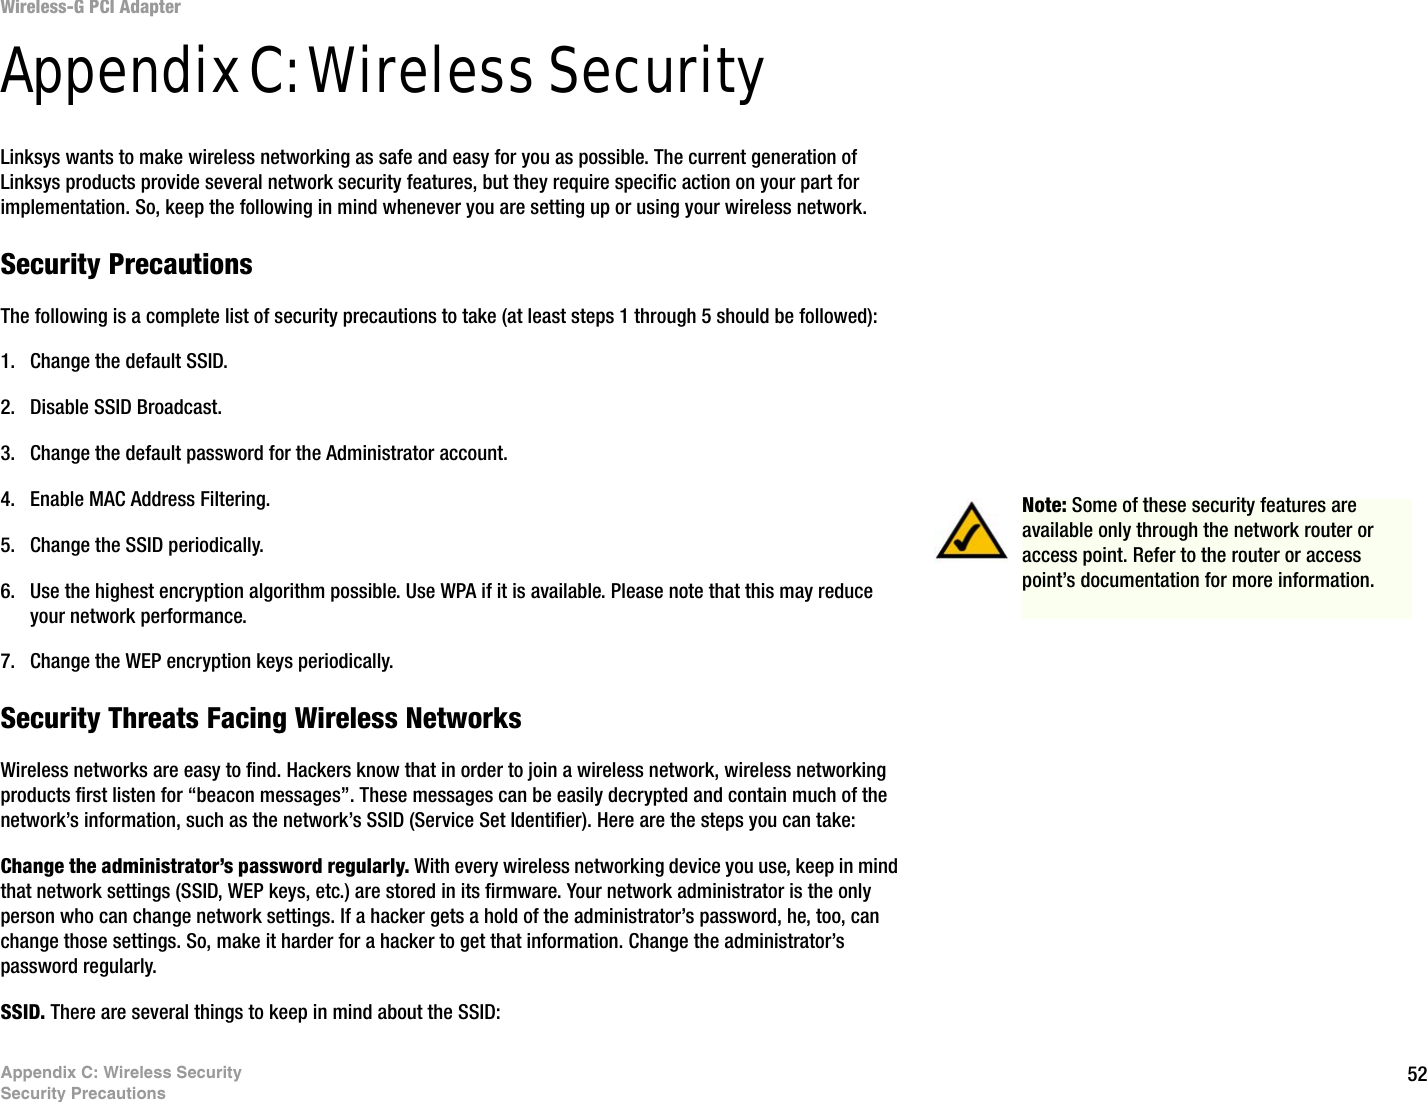 52Appendix C: Wireless SecuritySecurity PrecautionsWireless-G PCI AdapterAppendix C: Wireless SecurityLinksys wants to make wireless networking as safe and easy for you as possible. The current generation of Linksys products provide several network security features, but they require specific action on your part for implementation. So, keep the following in mind whenever you are setting up or using your wireless network.Security PrecautionsThe following is a complete list of security precautions to take (at least steps 1 through 5 should be followed):1. Change the default SSID. 2. Disable SSID Broadcast. 3. Change the default password for the Administrator account. 4. Enable MAC Address Filtering. 5. Change the SSID periodically. 6. Use the highest encryption algorithm possible. Use WPA if it is available. Please note that this may reduce your network performance. 7. Change the WEP encryption keys periodically. Security Threats Facing Wireless Networks Wireless networks are easy to find. Hackers know that in order to join a wireless network, wireless networking products first listen for “beacon messages”. These messages can be easily decrypted and contain much of the network’s information, such as the network’s SSID (Service Set Identifier). Here are the steps you can take:Change the administrator’s password regularly. With every wireless networking device you use, keep in mind that network settings (SSID, WEP keys, etc.) are stored in its firmware. Your network administrator is the only person who can change network settings. If a hacker gets a hold of the administrator’s password, he, too, can change those settings. So, make it harder for a hacker to get that information. Change the administrator’s password regularly.SSID. There are several things to keep in mind about the SSID: Note: Some of these security features are available only through the network router or access point. Refer to the router or access point’s documentation for more information.